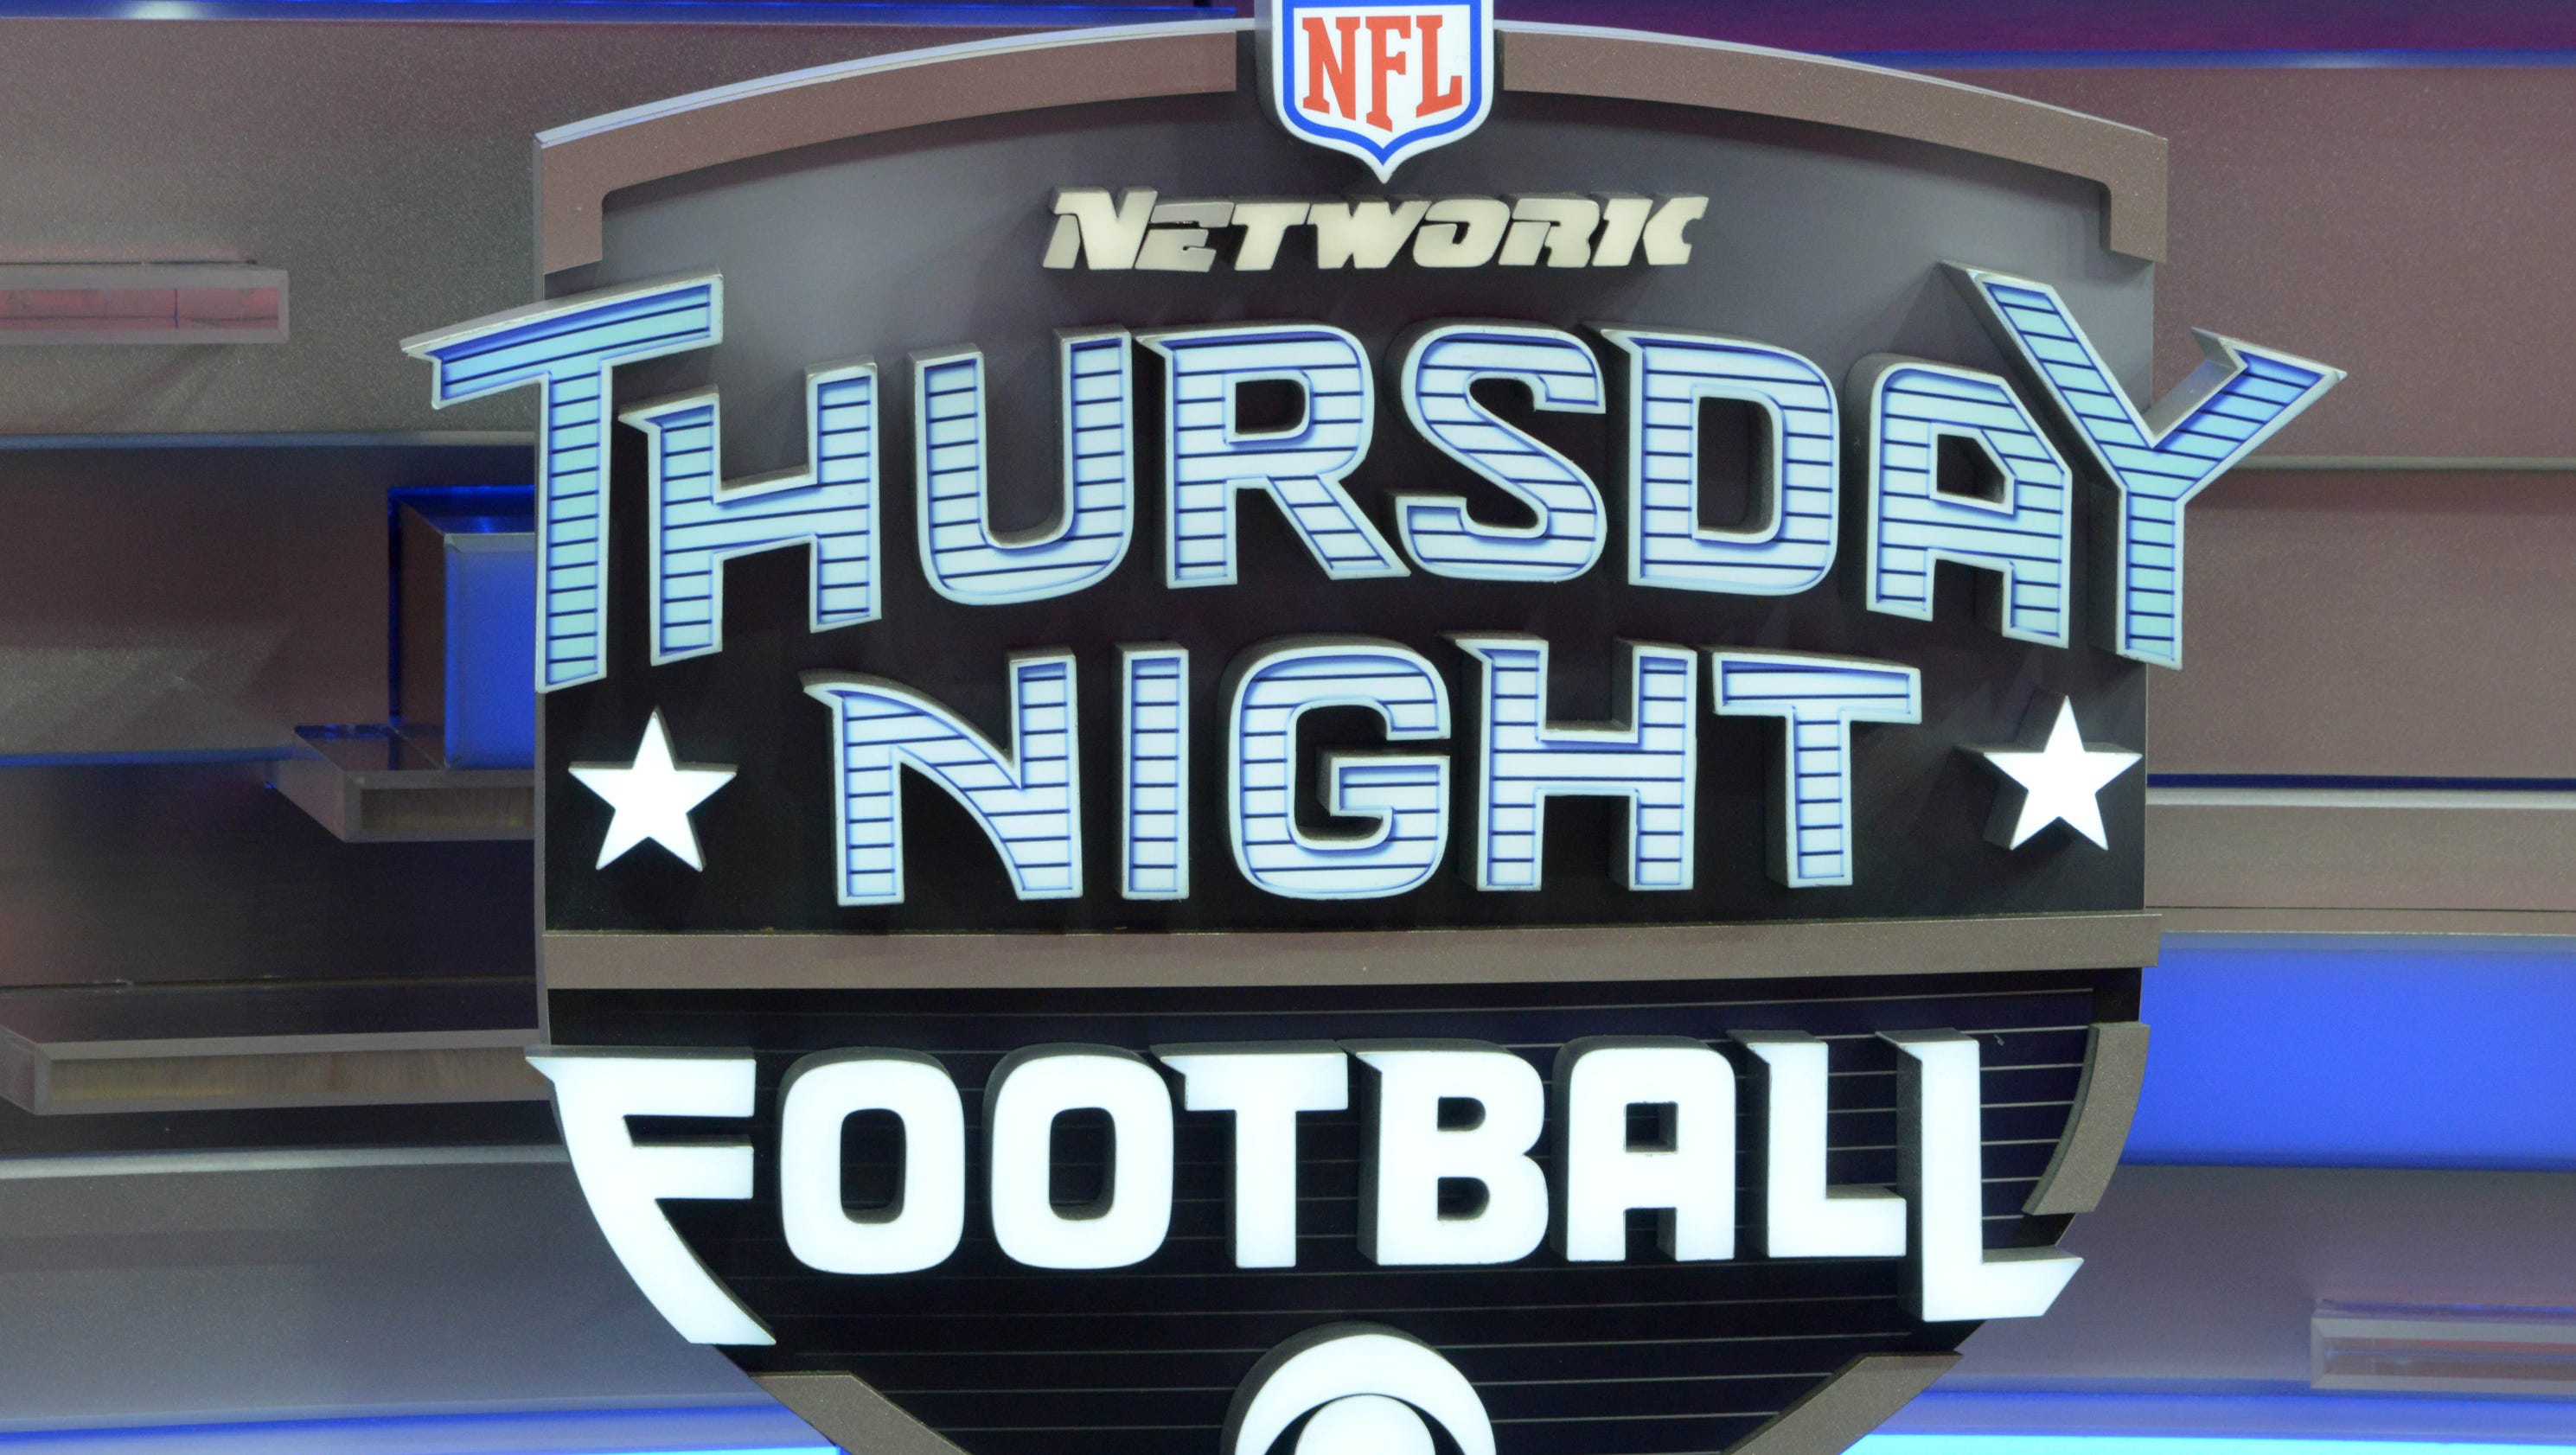 NFL's Thursday night games get mixed reviews